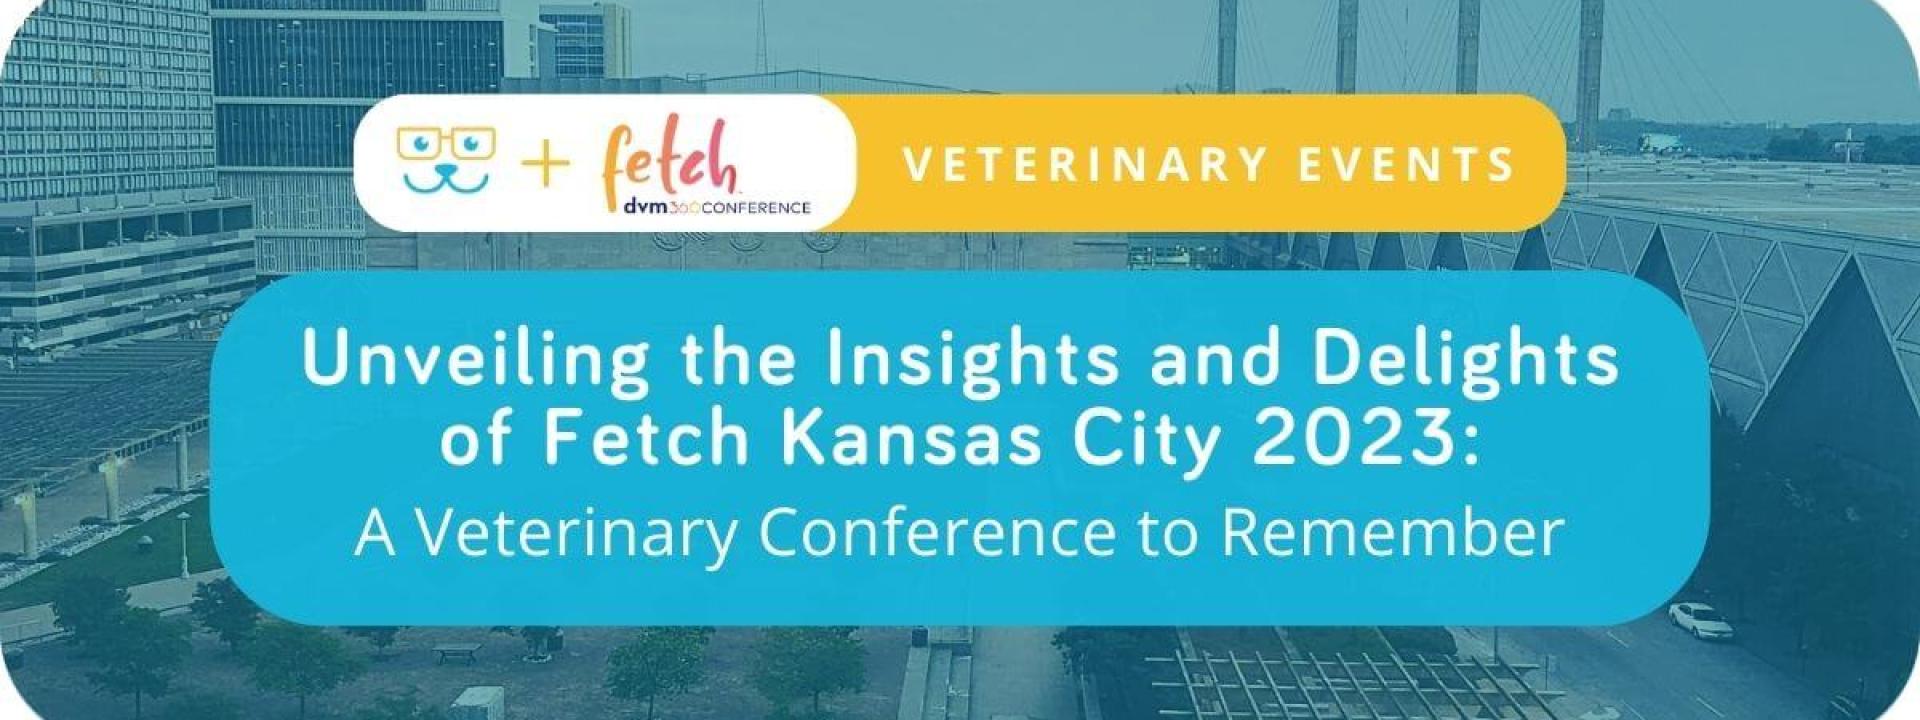 Unveiling the Insights and Delights of Fetch Kansas City 2023: A Veterinary Conference to Remember